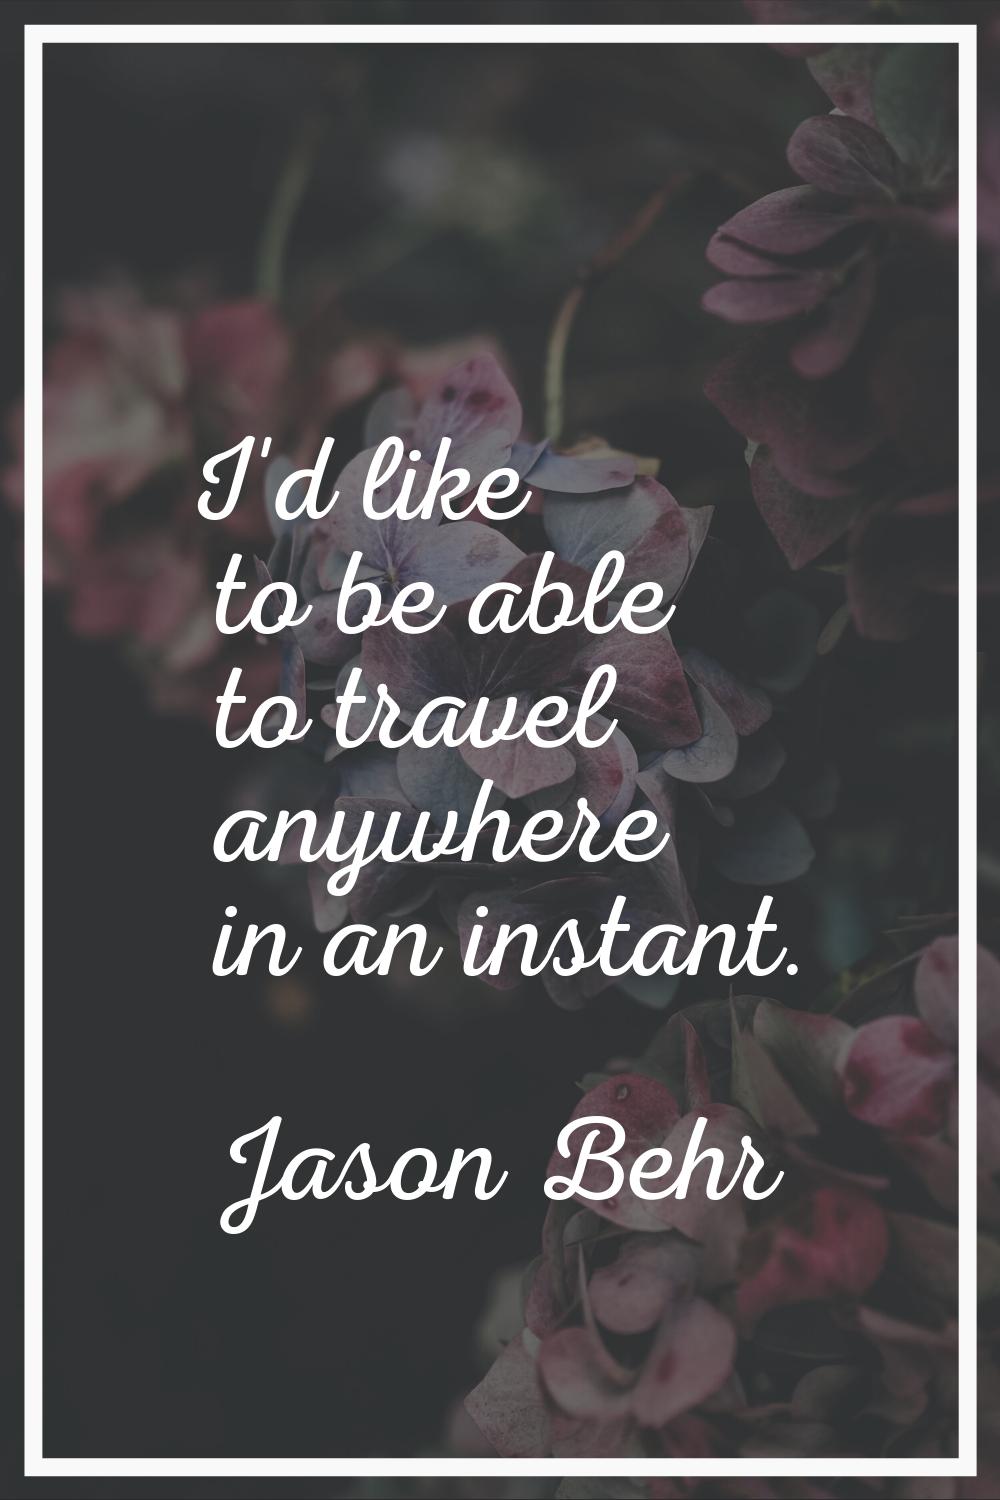 I'd like to be able to travel anywhere in an instant.